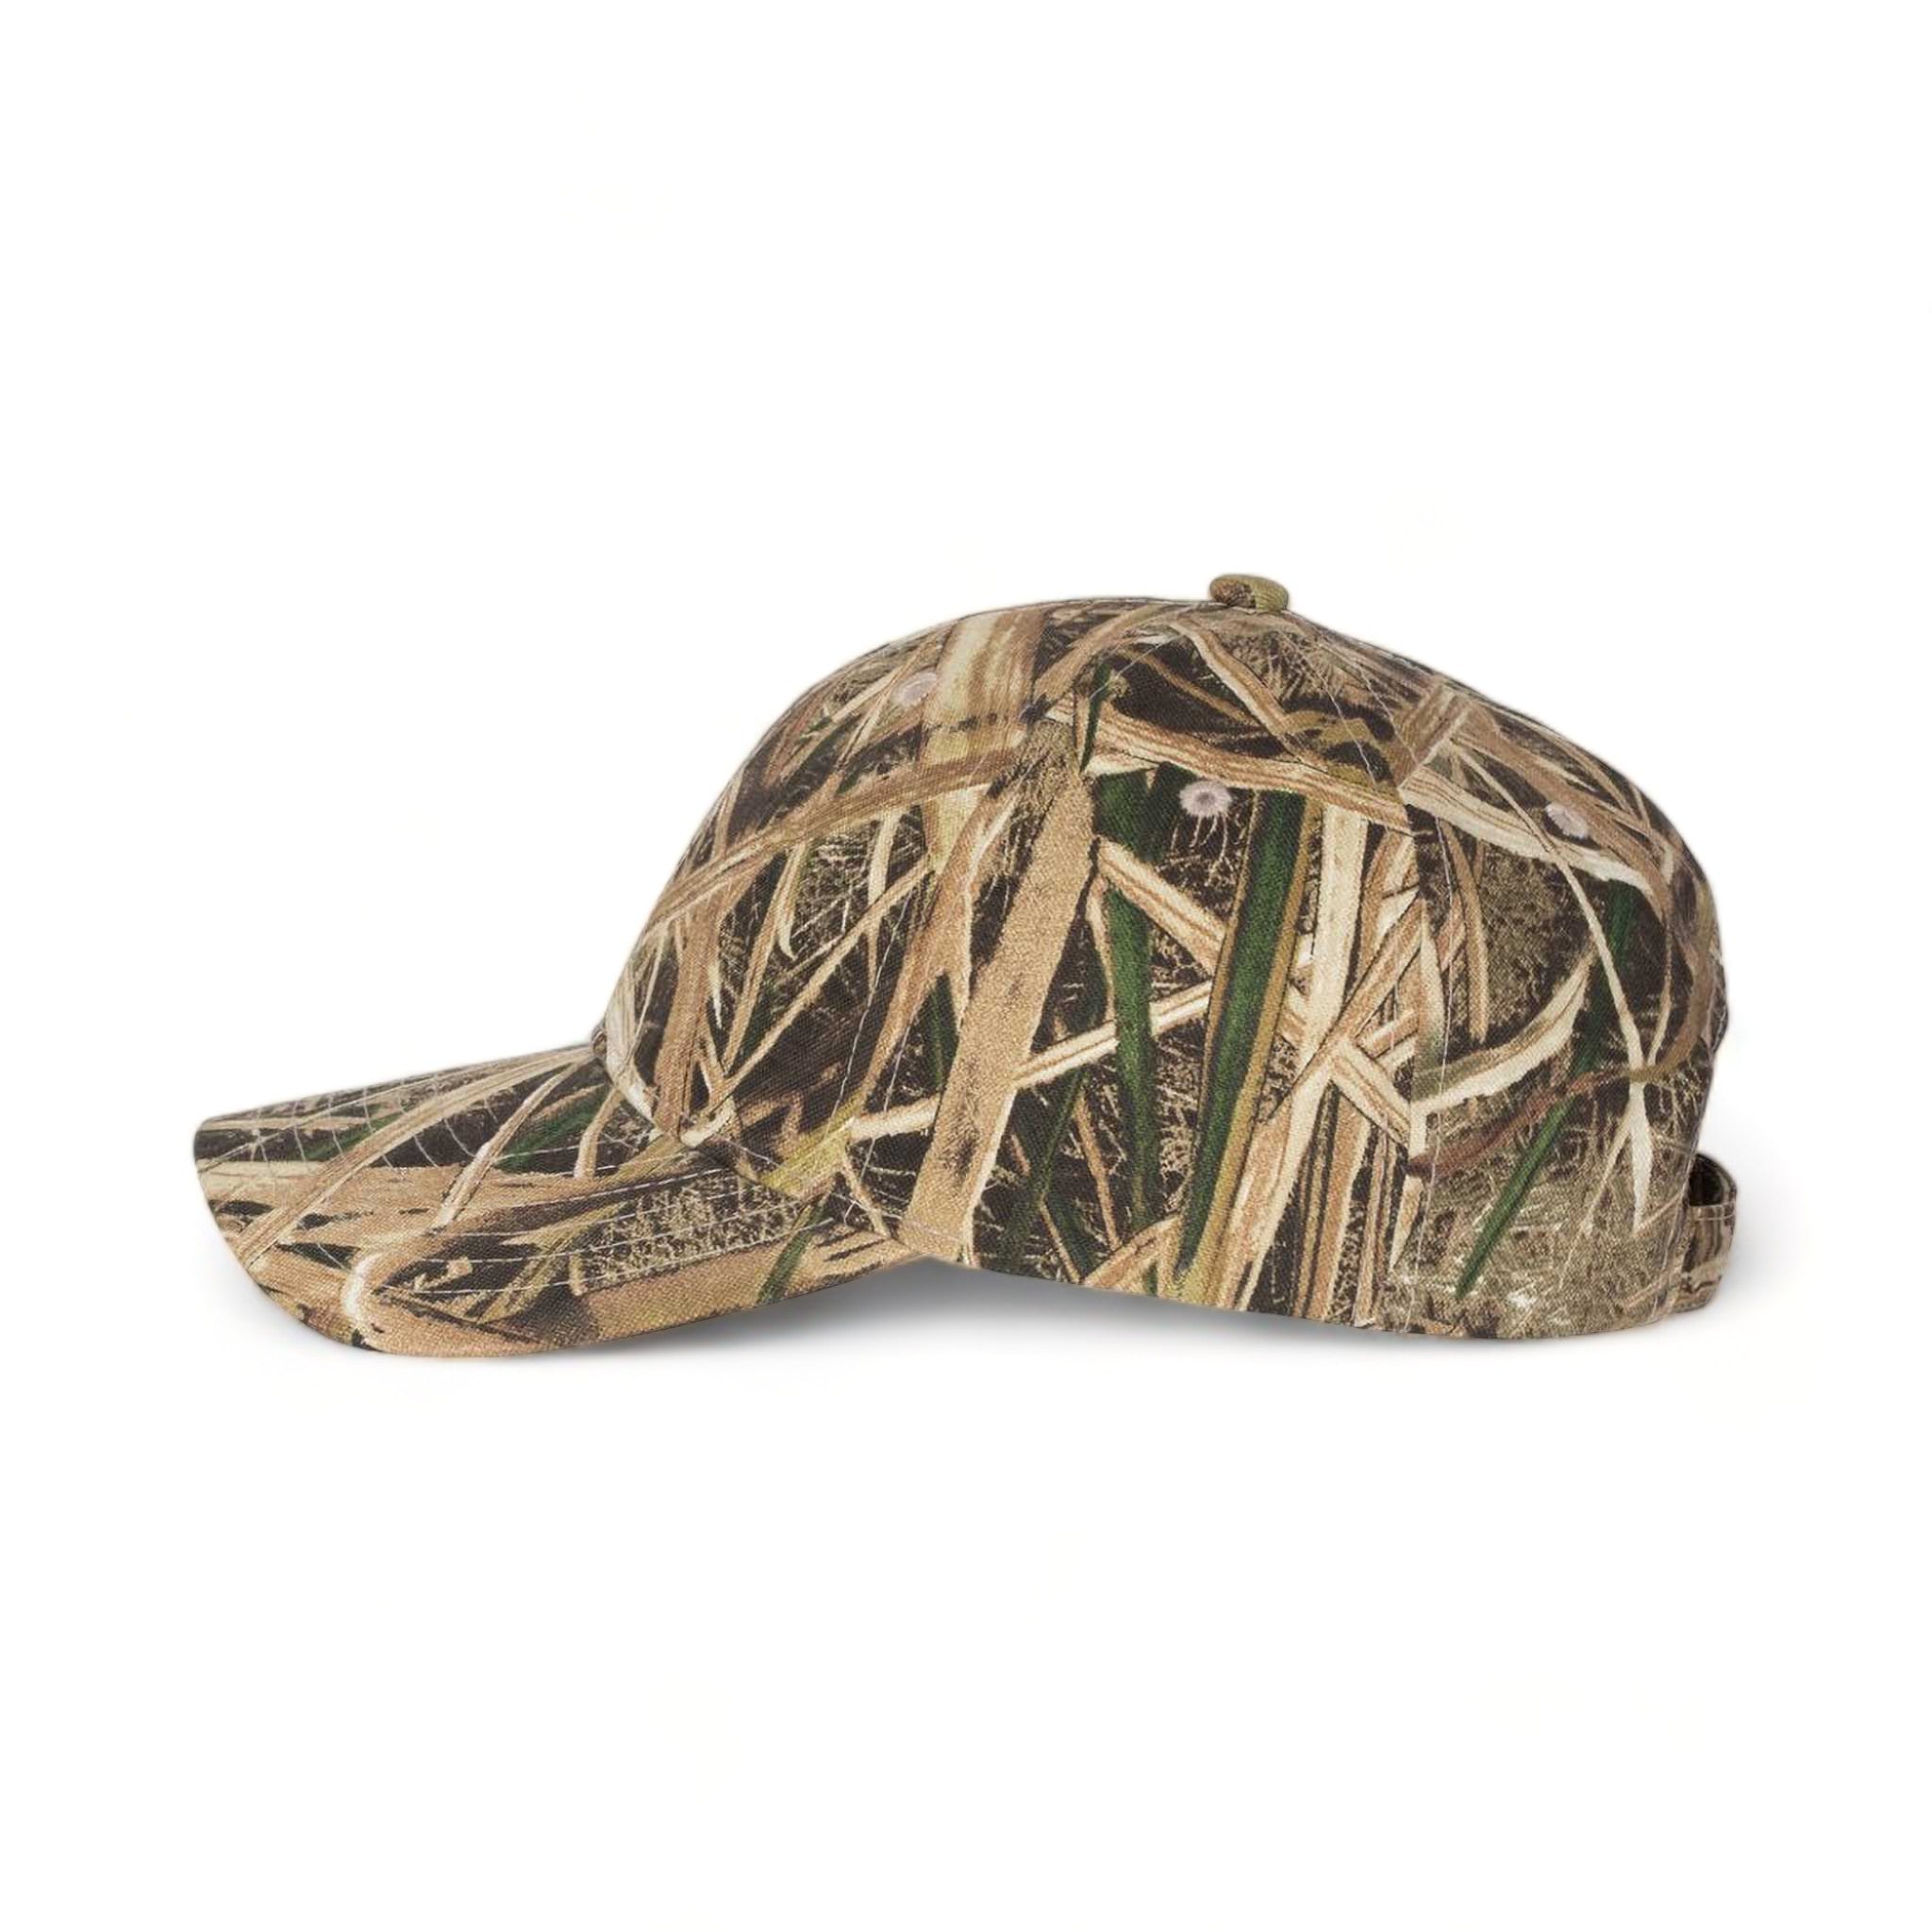 Side view of Kati LC10 custom hat in mossy oak shadow grass blades